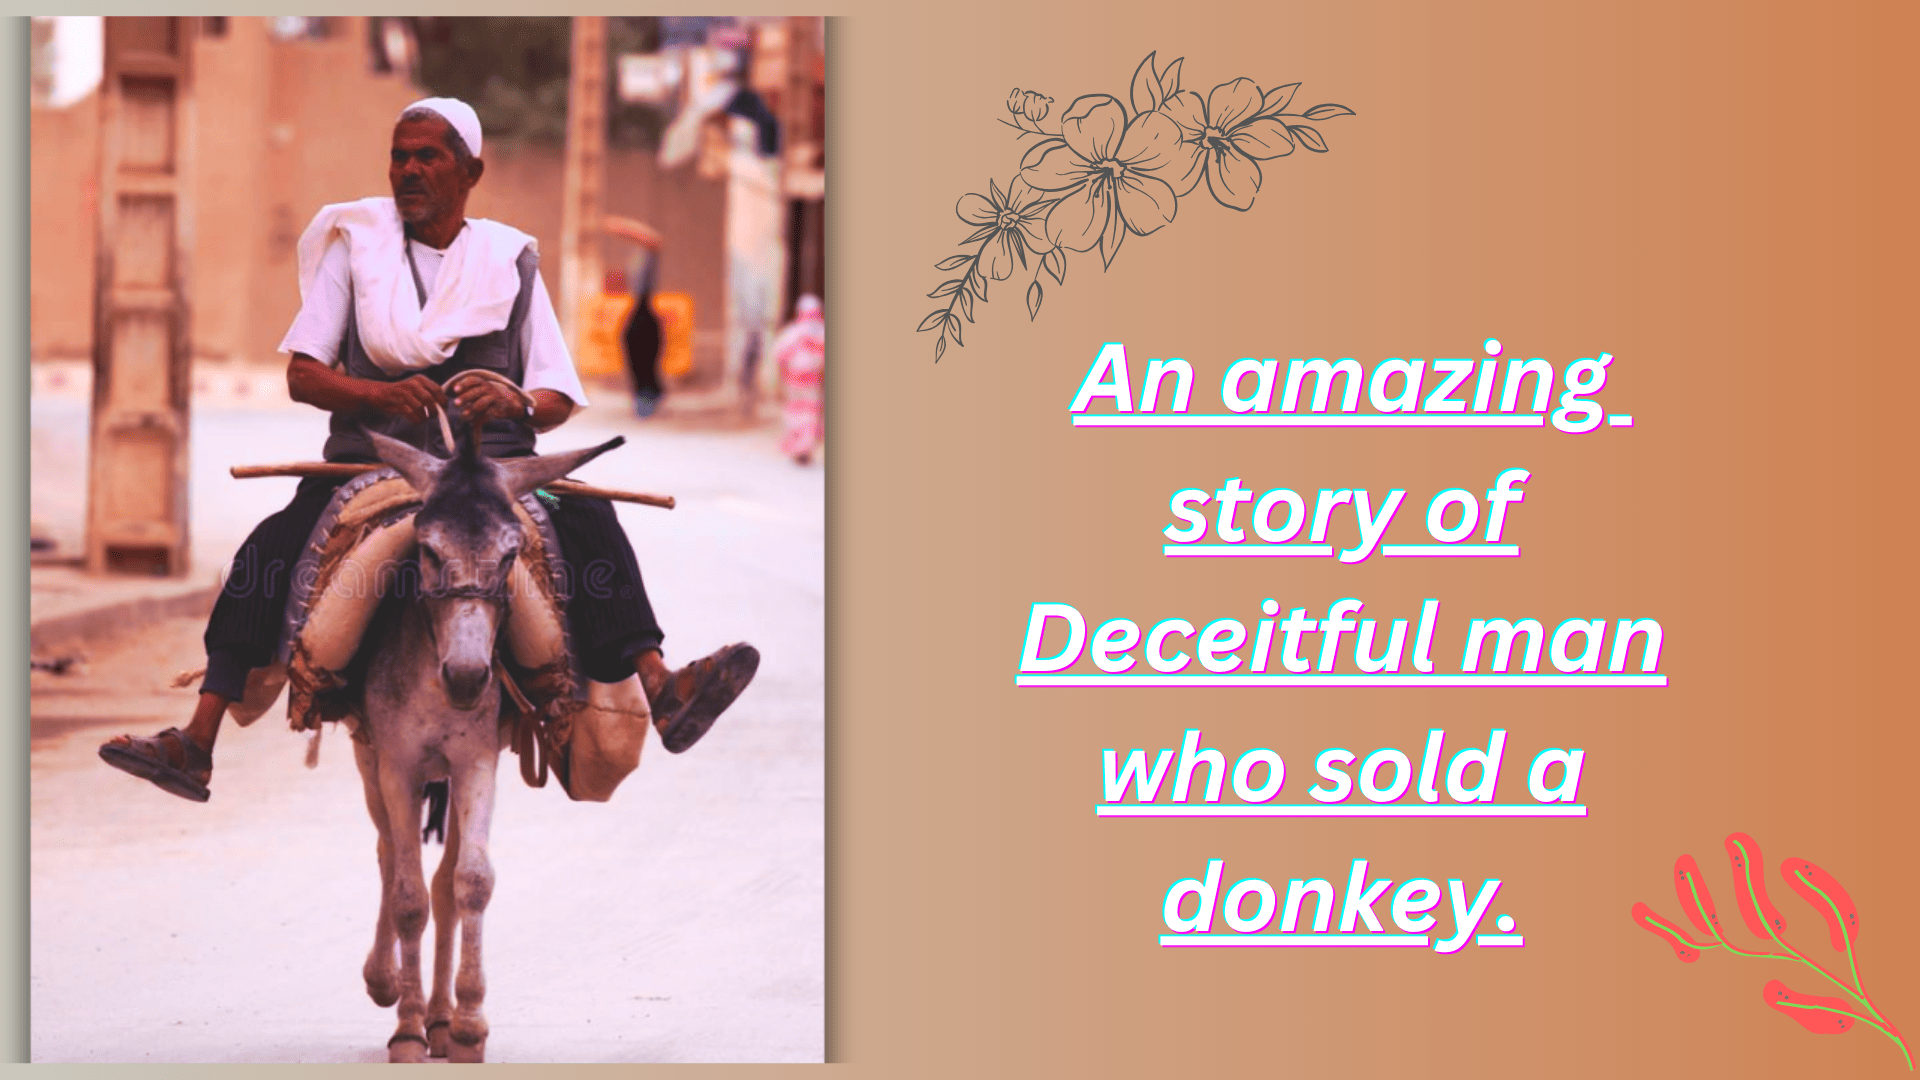 An amazing story of Deceitful man who sold a donkey.